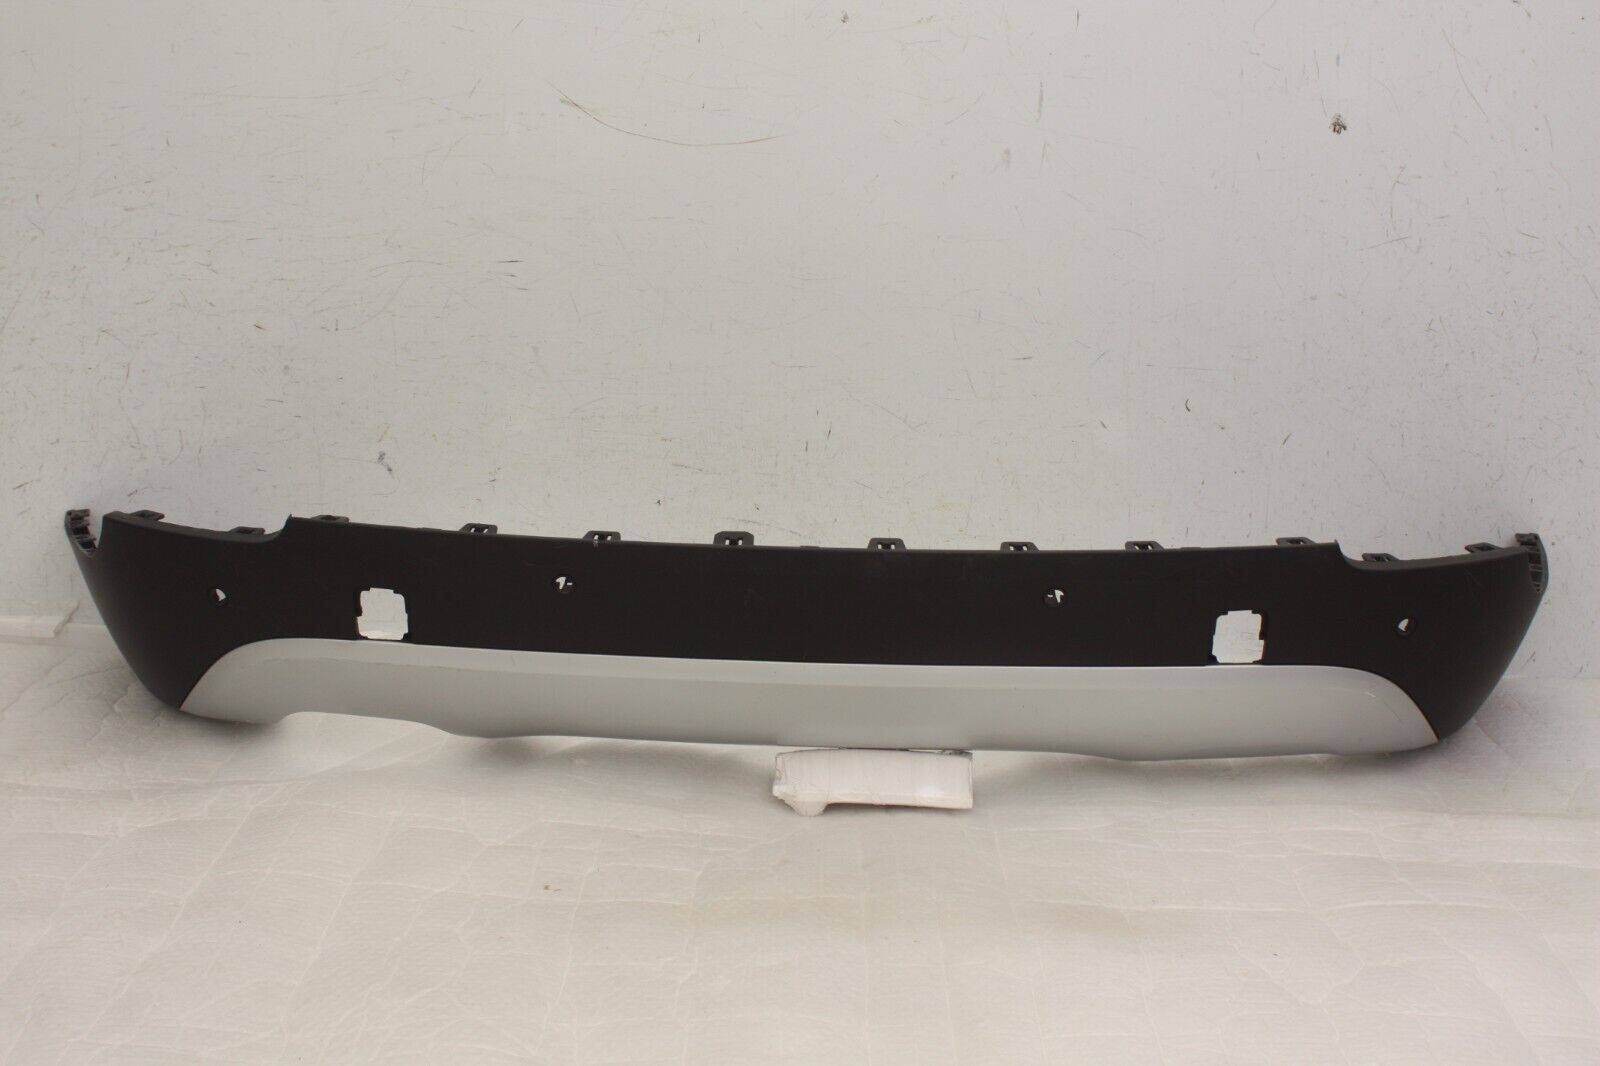 BMW X1 E84 Rear Bumper Lower Section 2009 TO 2012 51122991483 Genuine 176333580142